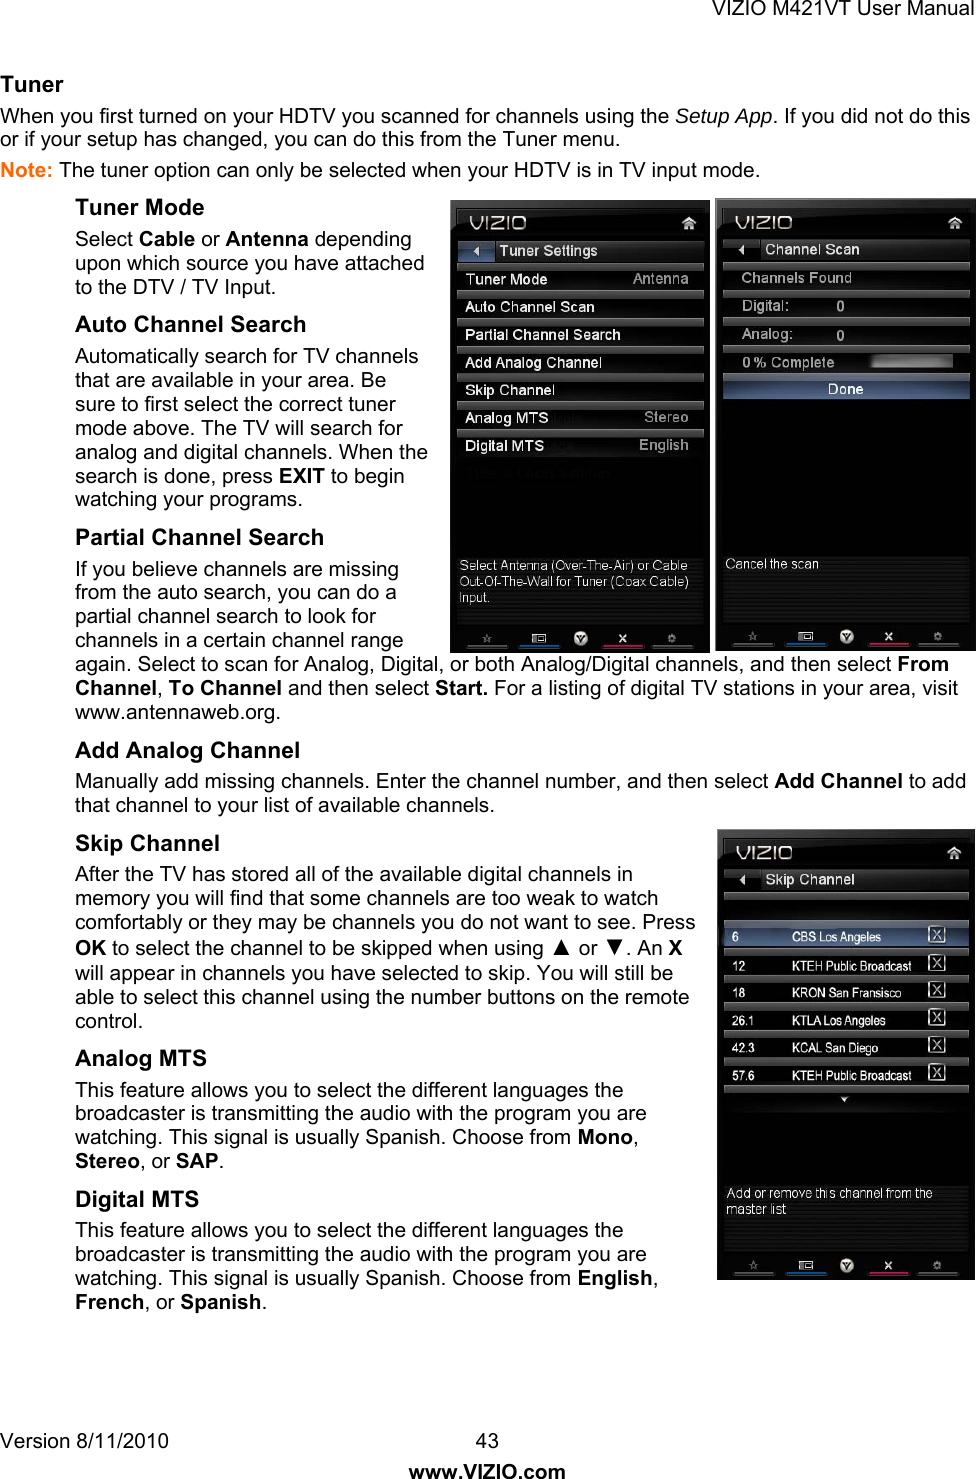 VIZIO M421VT User Manual Version 8/11/2010  43   www.VIZIO.com Tuner  When you first turned on your HDTV you scanned for channels using the Setup App. If you did not do this or if your setup has changed, you can do this from the Tuner menu. Note: The tuner option can only be selected when your HDTV is in TV input mode. Tuner Mode  Select Cable or Antenna depending upon which source you have attached to the DTV / TV Input. Auto Channel Search  Automatically search for TV channels that are available in your area. Be sure to first select the correct tuner mode above. The TV will search for analog and digital channels. When the search is done, press EXIT to begin watching your programs.  Partial Channel Search If you believe channels are missing from the auto search, you can do a partial channel search to look for channels in a certain channel range again. Select to scan for Analog, Digital, or both Analog/Digital channels, and then select From Channel, To Channel and then select Start. For a listing of digital TV stations in your area, visit www.antennaweb.org. Add Analog Channel Manually add missing channels. Enter the channel number, and then select Add Channel to add that channel to your list of available channels.  Skip Channel After the TV has stored all of the available digital channels in memory you will find that some channels are too weak to watch comfortably or they may be channels you do not want to see. Press OK to select the channel to be skipped when using ▲ or ▼. An X will appear in channels you have selected to skip. You will still be able to select this channel using the number buttons on the remote control. Analog MTS This feature allows you to select the different languages the broadcaster is transmitting the audio with the program you are watching. This signal is usually Spanish. Choose from Mono, Stereo, or SAP. Digital MTS This feature allows you to select the different languages the broadcaster is transmitting the audio with the program you are watching. This signal is usually Spanish. Choose from English, French, or Spanish. 